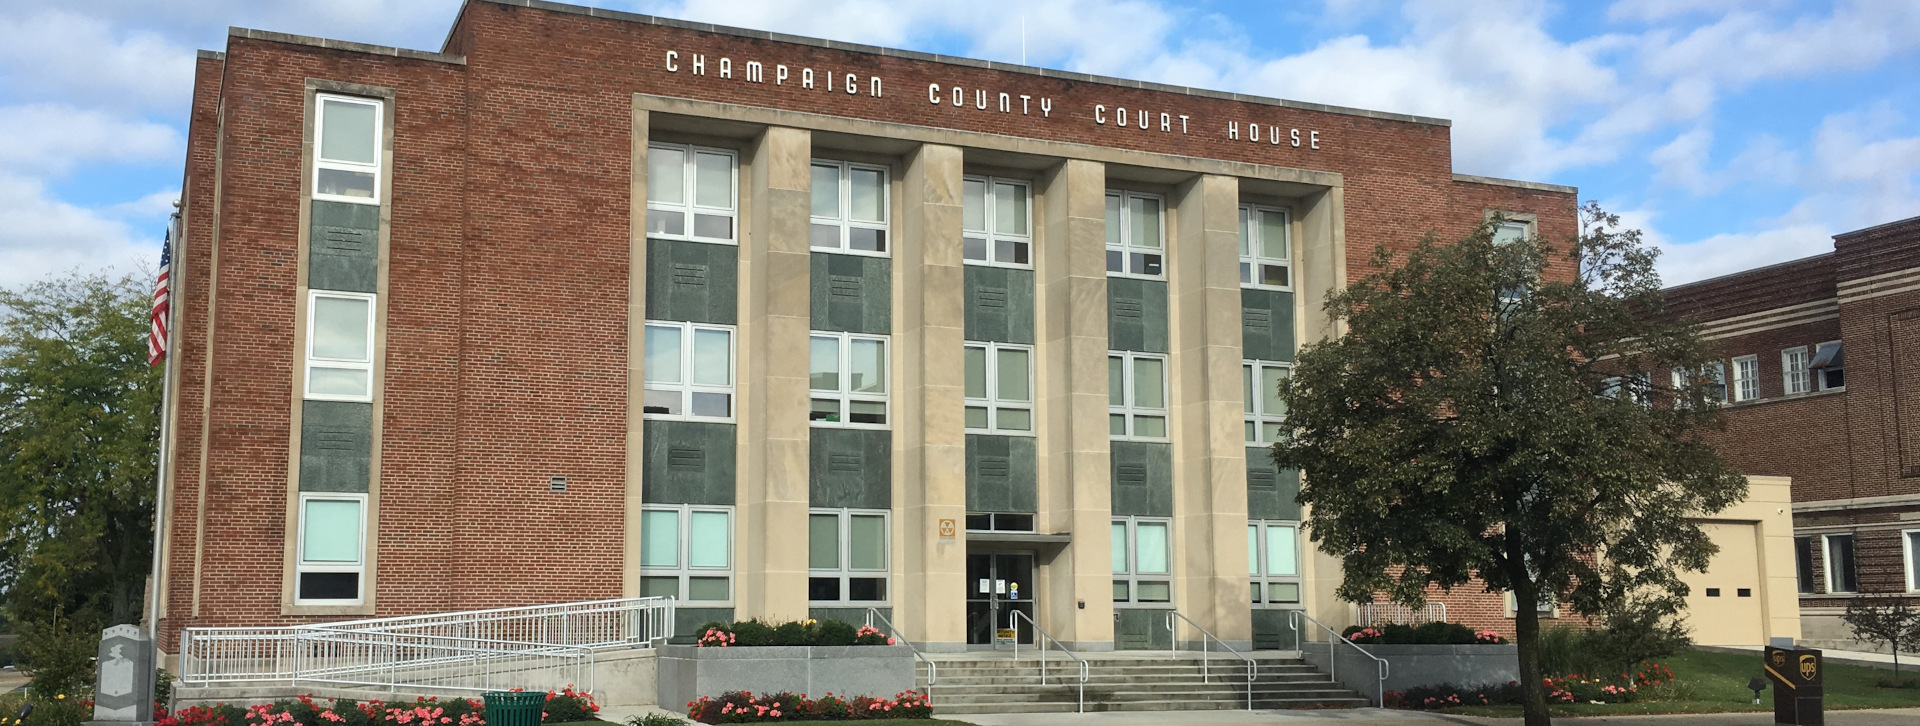 Champaign County Family Court